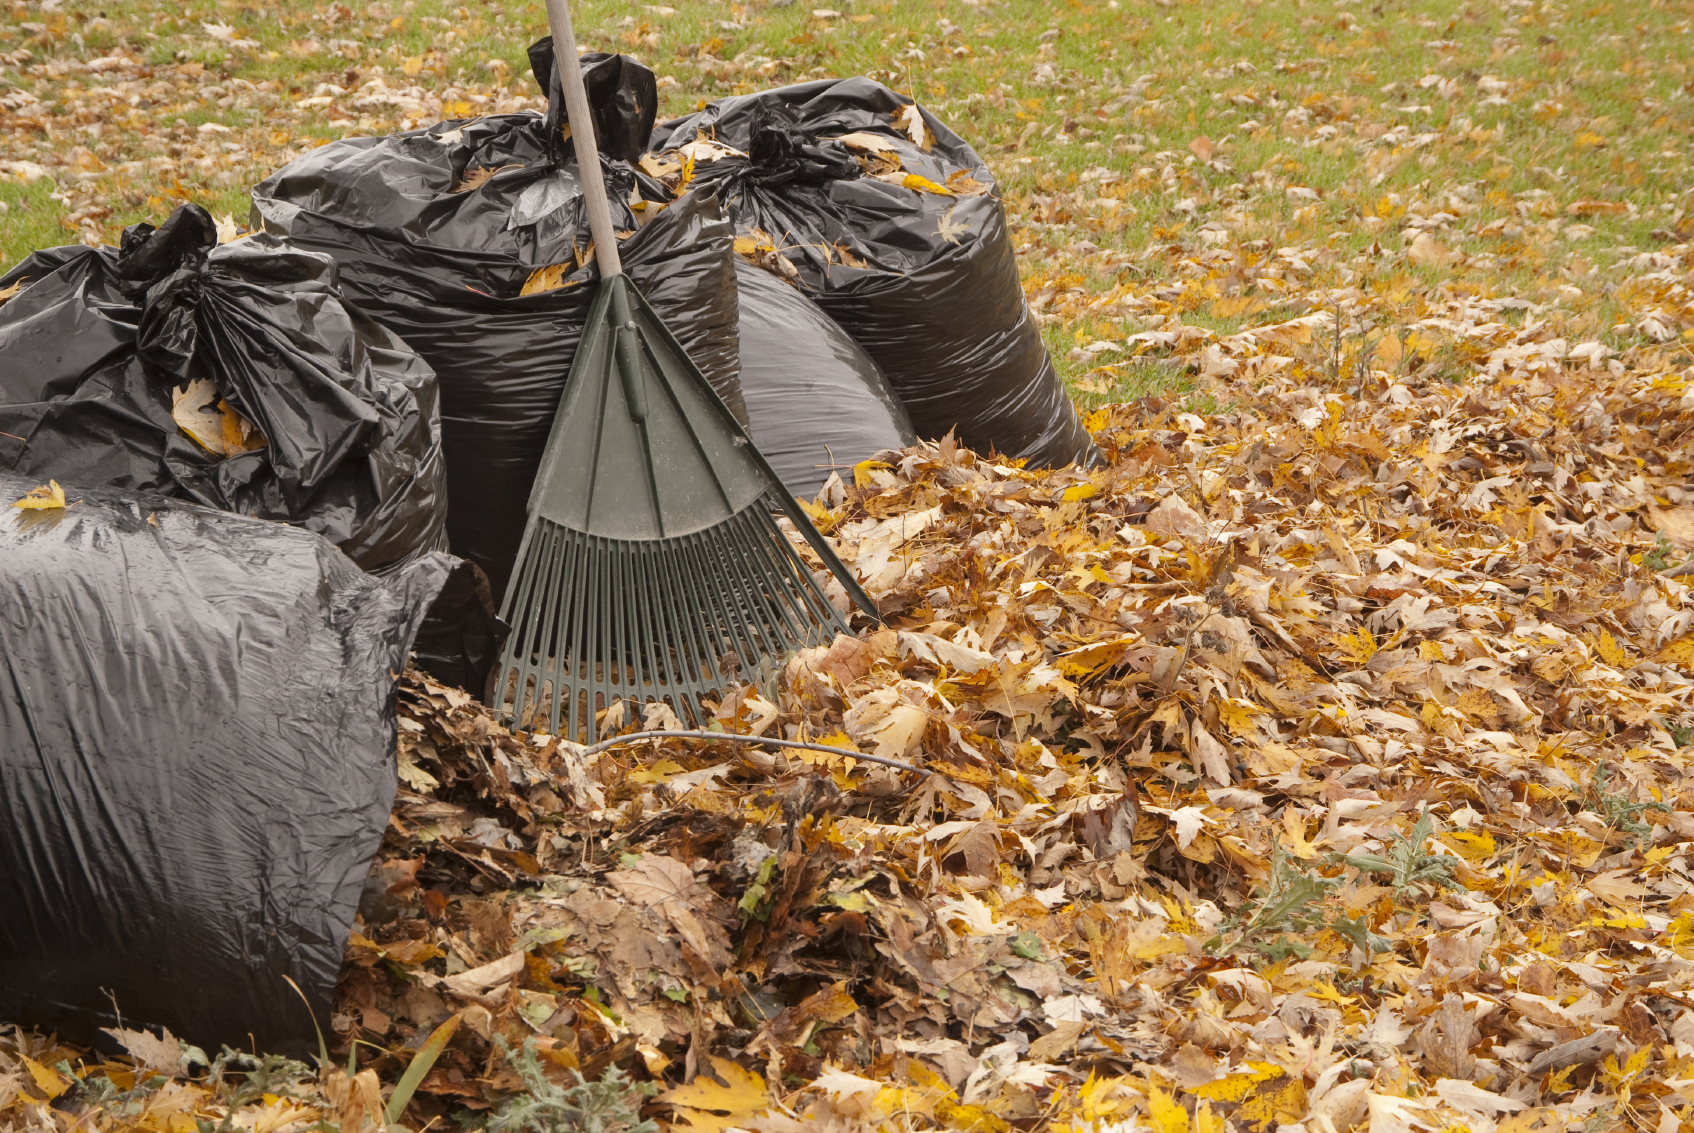 Forget the bags — mulch leaves right into the grass to provide nutrients for the lawn.